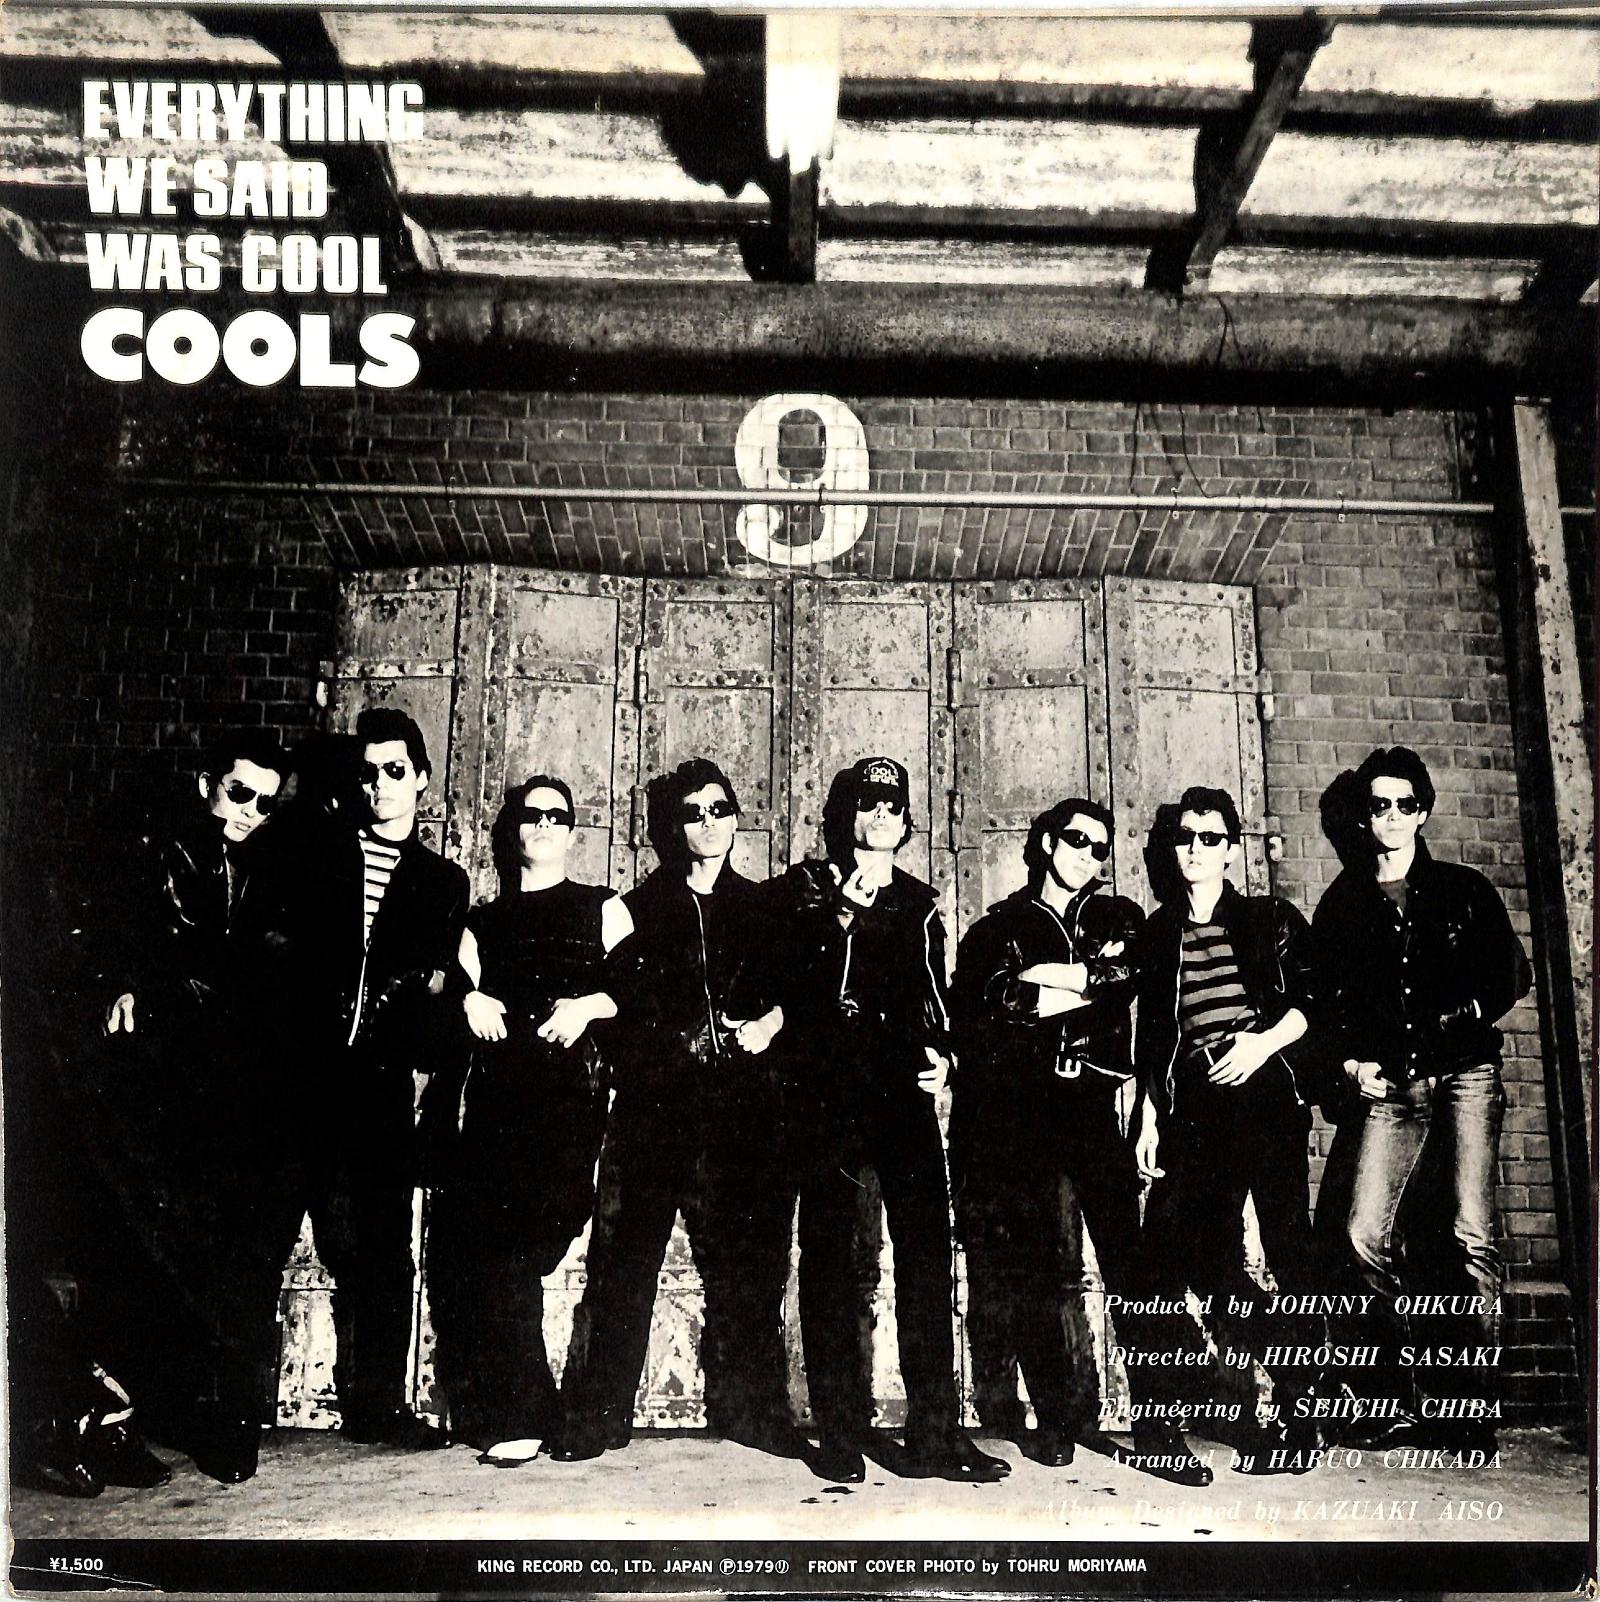 COOLS ROCKABILLY CLUB - Everything We Said Was Cool